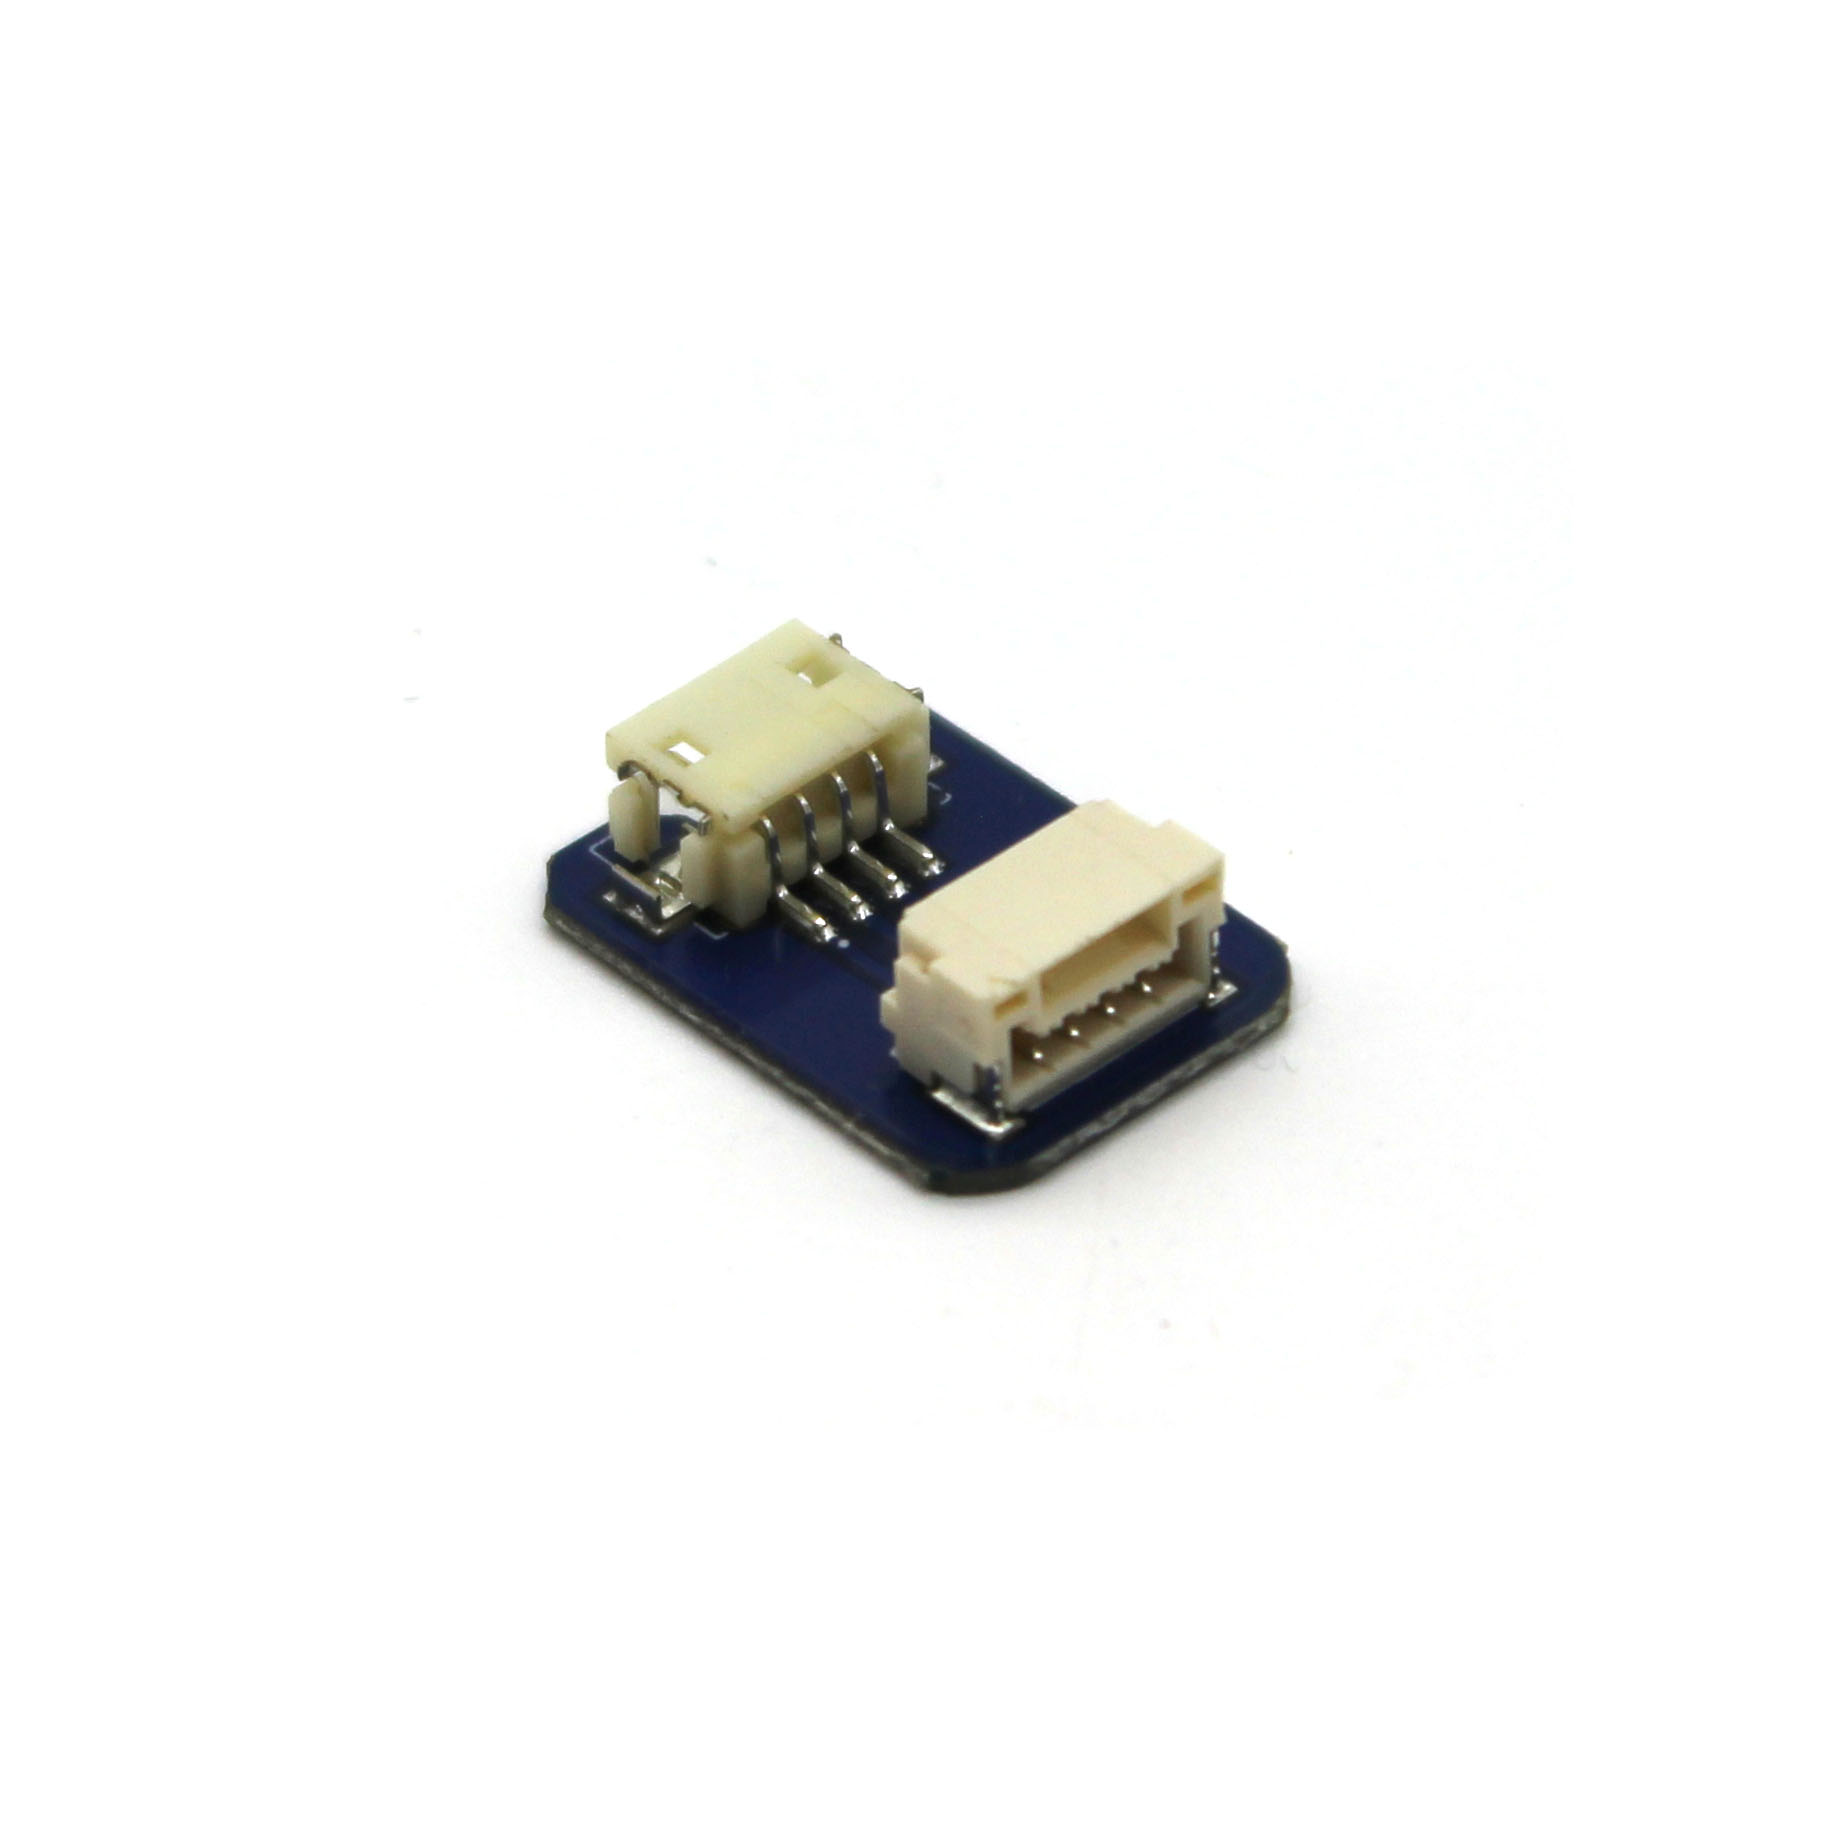  JST GH to DF13 Adapter, 4-pin